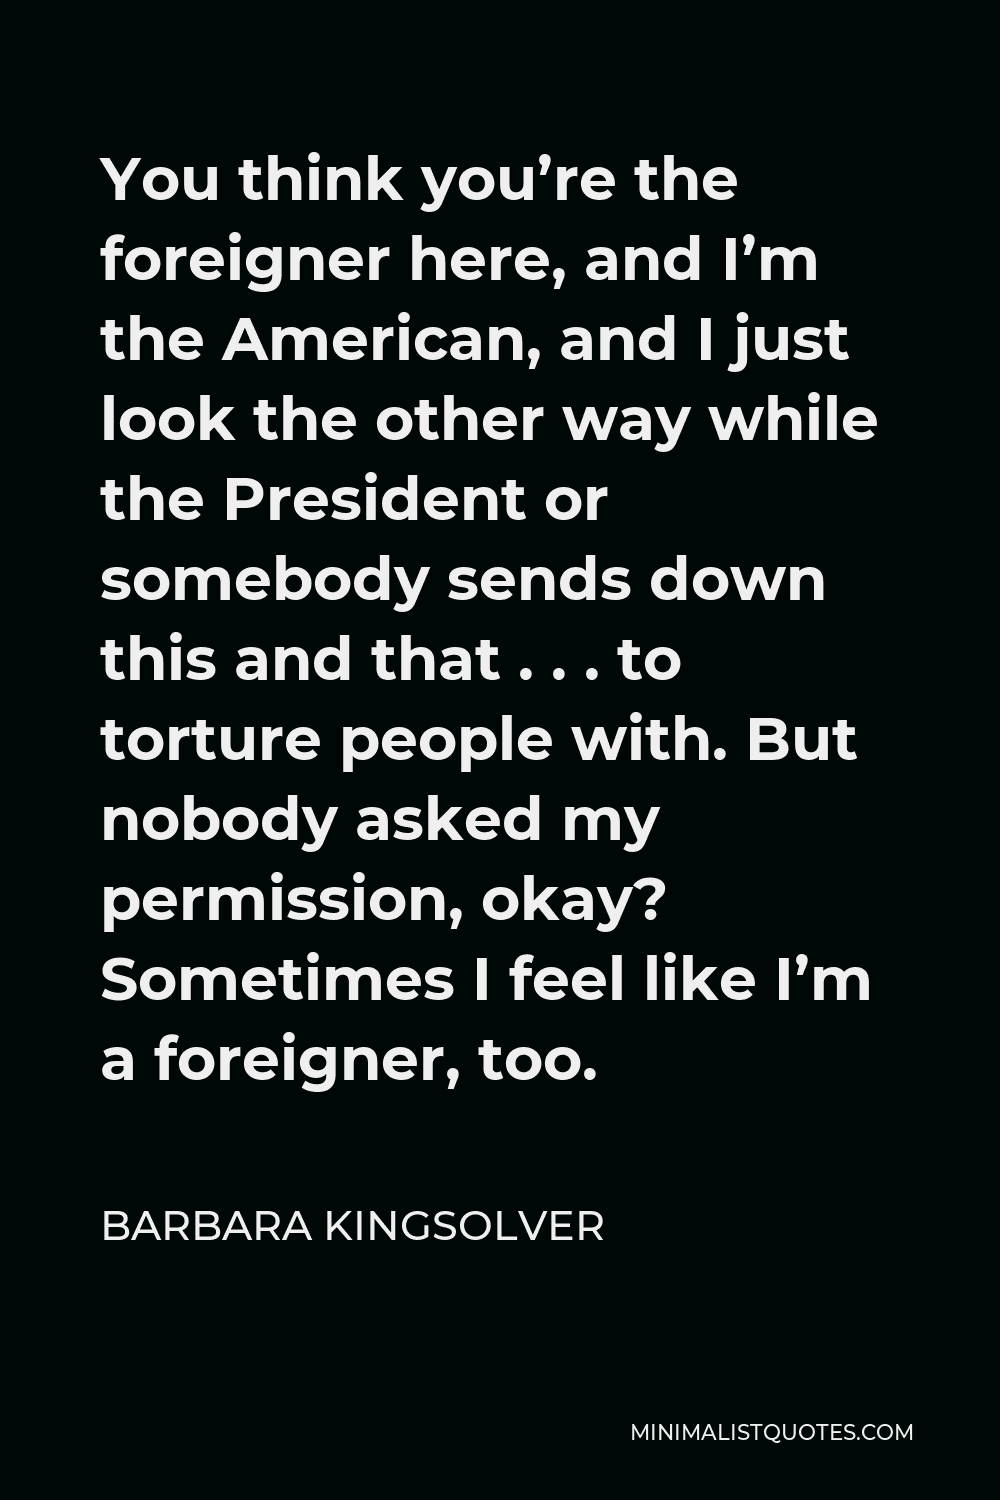 Barbara Kingsolver Quote - You think you’re the foreigner here, and I’m the American, and I just look the other way while the President or somebody sends down this and that . . . to torture people with. But nobody asked my permission, okay? Sometimes I feel like I’m a foreigner, too.